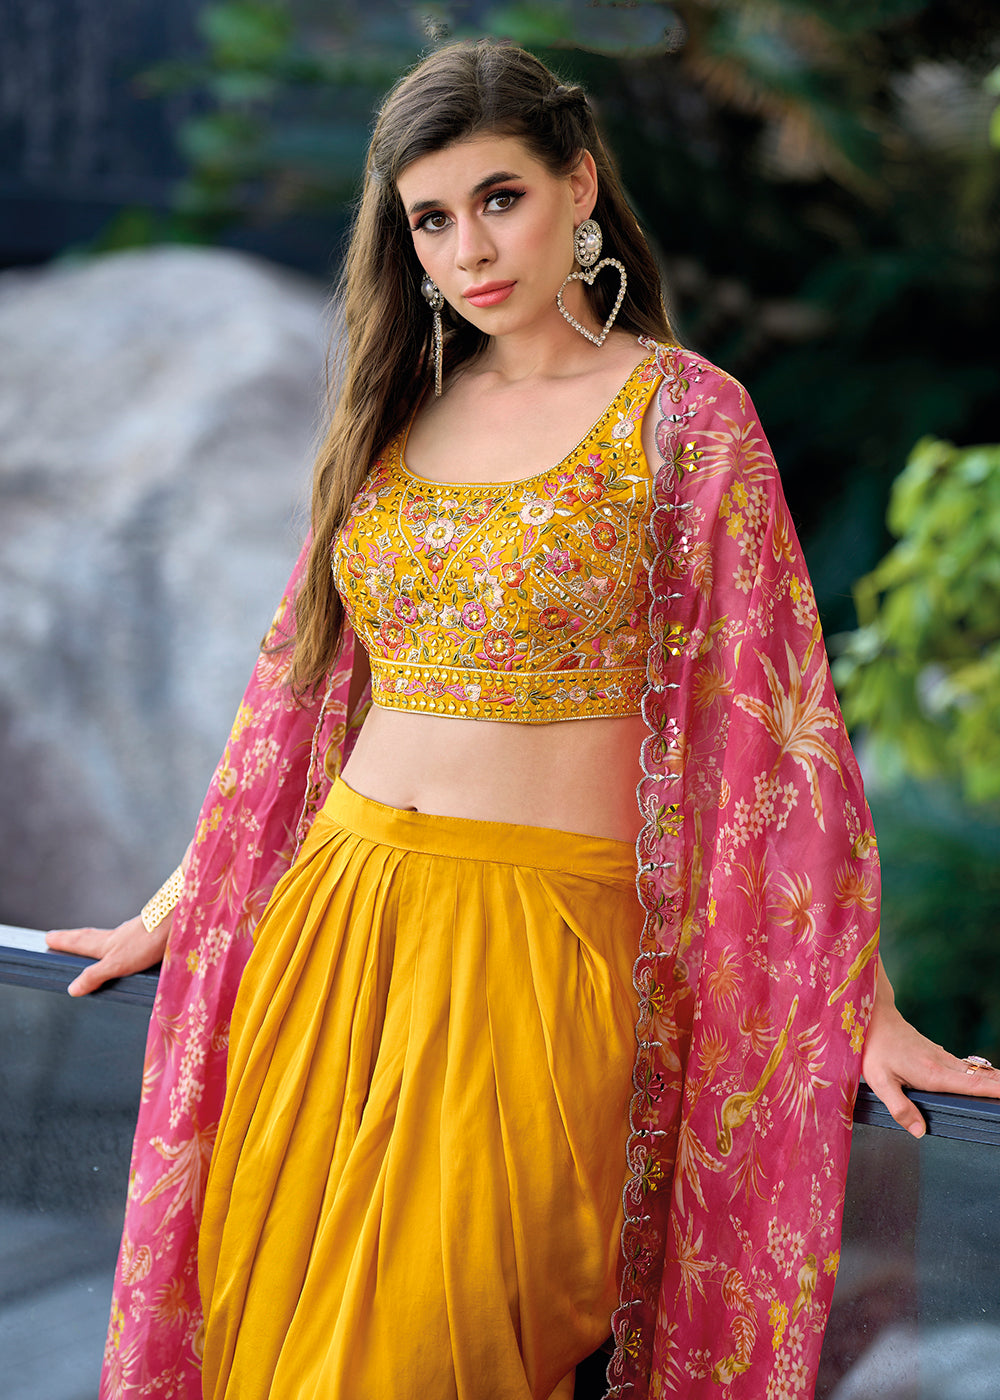 Buy Now Orange Satin Silk Embroidered Dhoti Style Crop Top Suit Online in USA, UK, Canada, Germany, Australia & Worldwide at Empress Clothing.